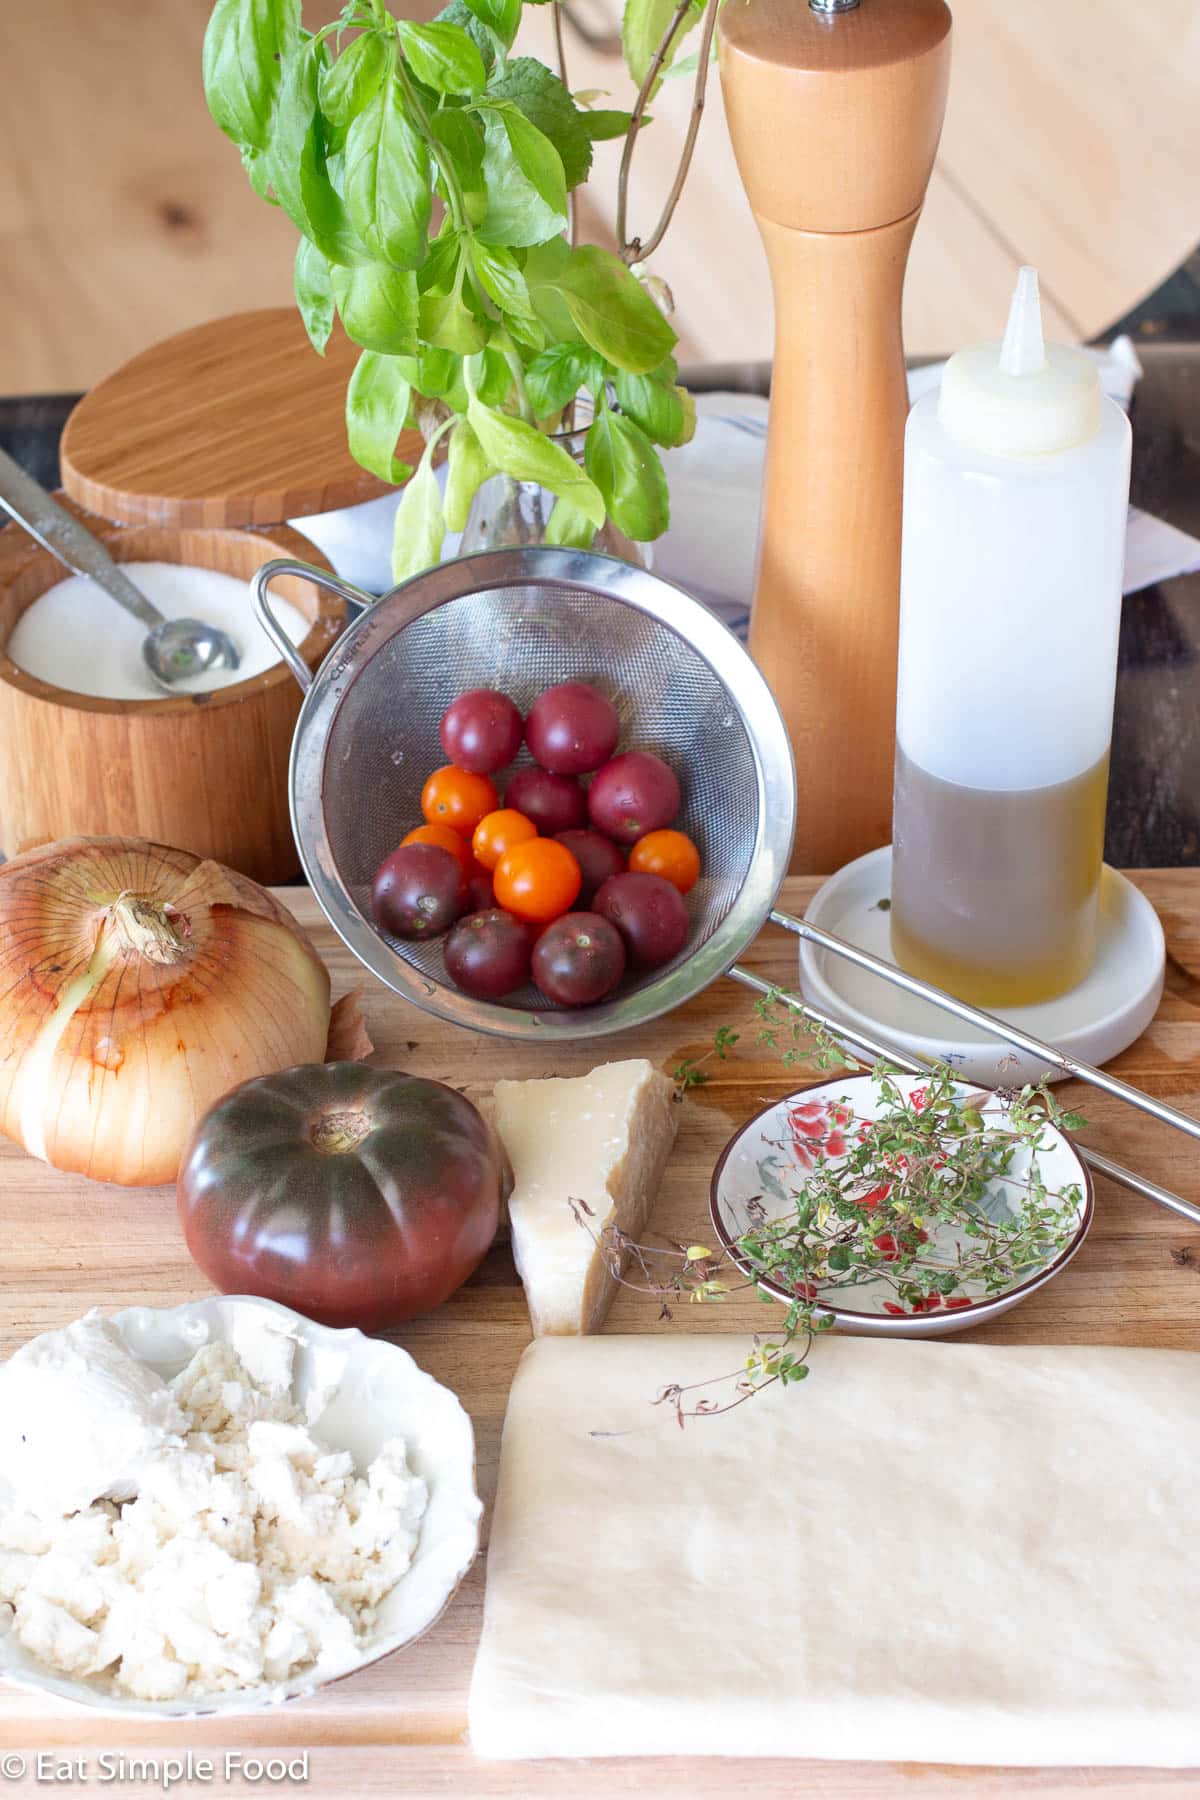 Ingredients on a wood cutting board: puff pastry rectangle, goat cheese crumbles in a white bowl, fresh thyme sprigs, chunk of Parmesan cheese, tomato, onions, small colander of cherry tomatoes, olive oil, wood jar of salt, and fresh basil sprigs in a small vase.